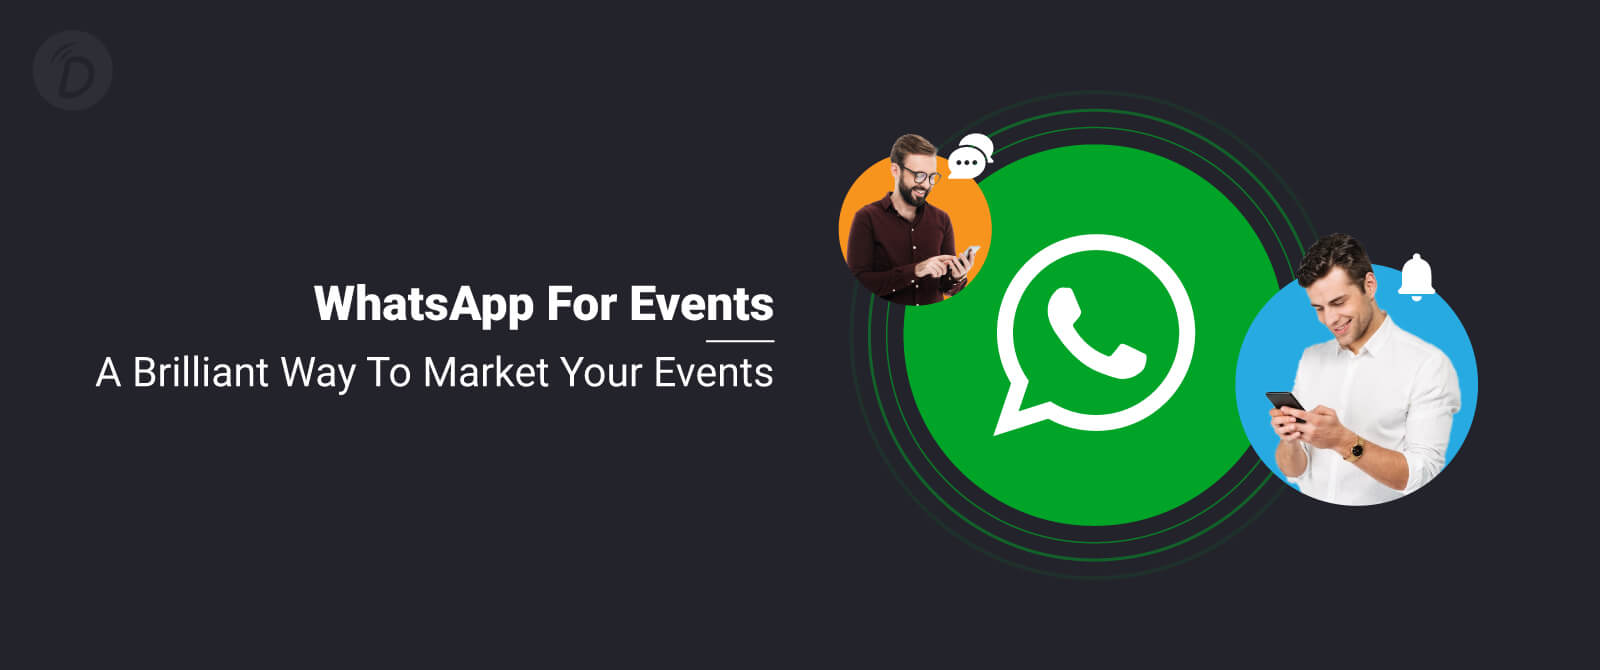 WhatsApp for Events – A Brilliant Way to Market Your Events